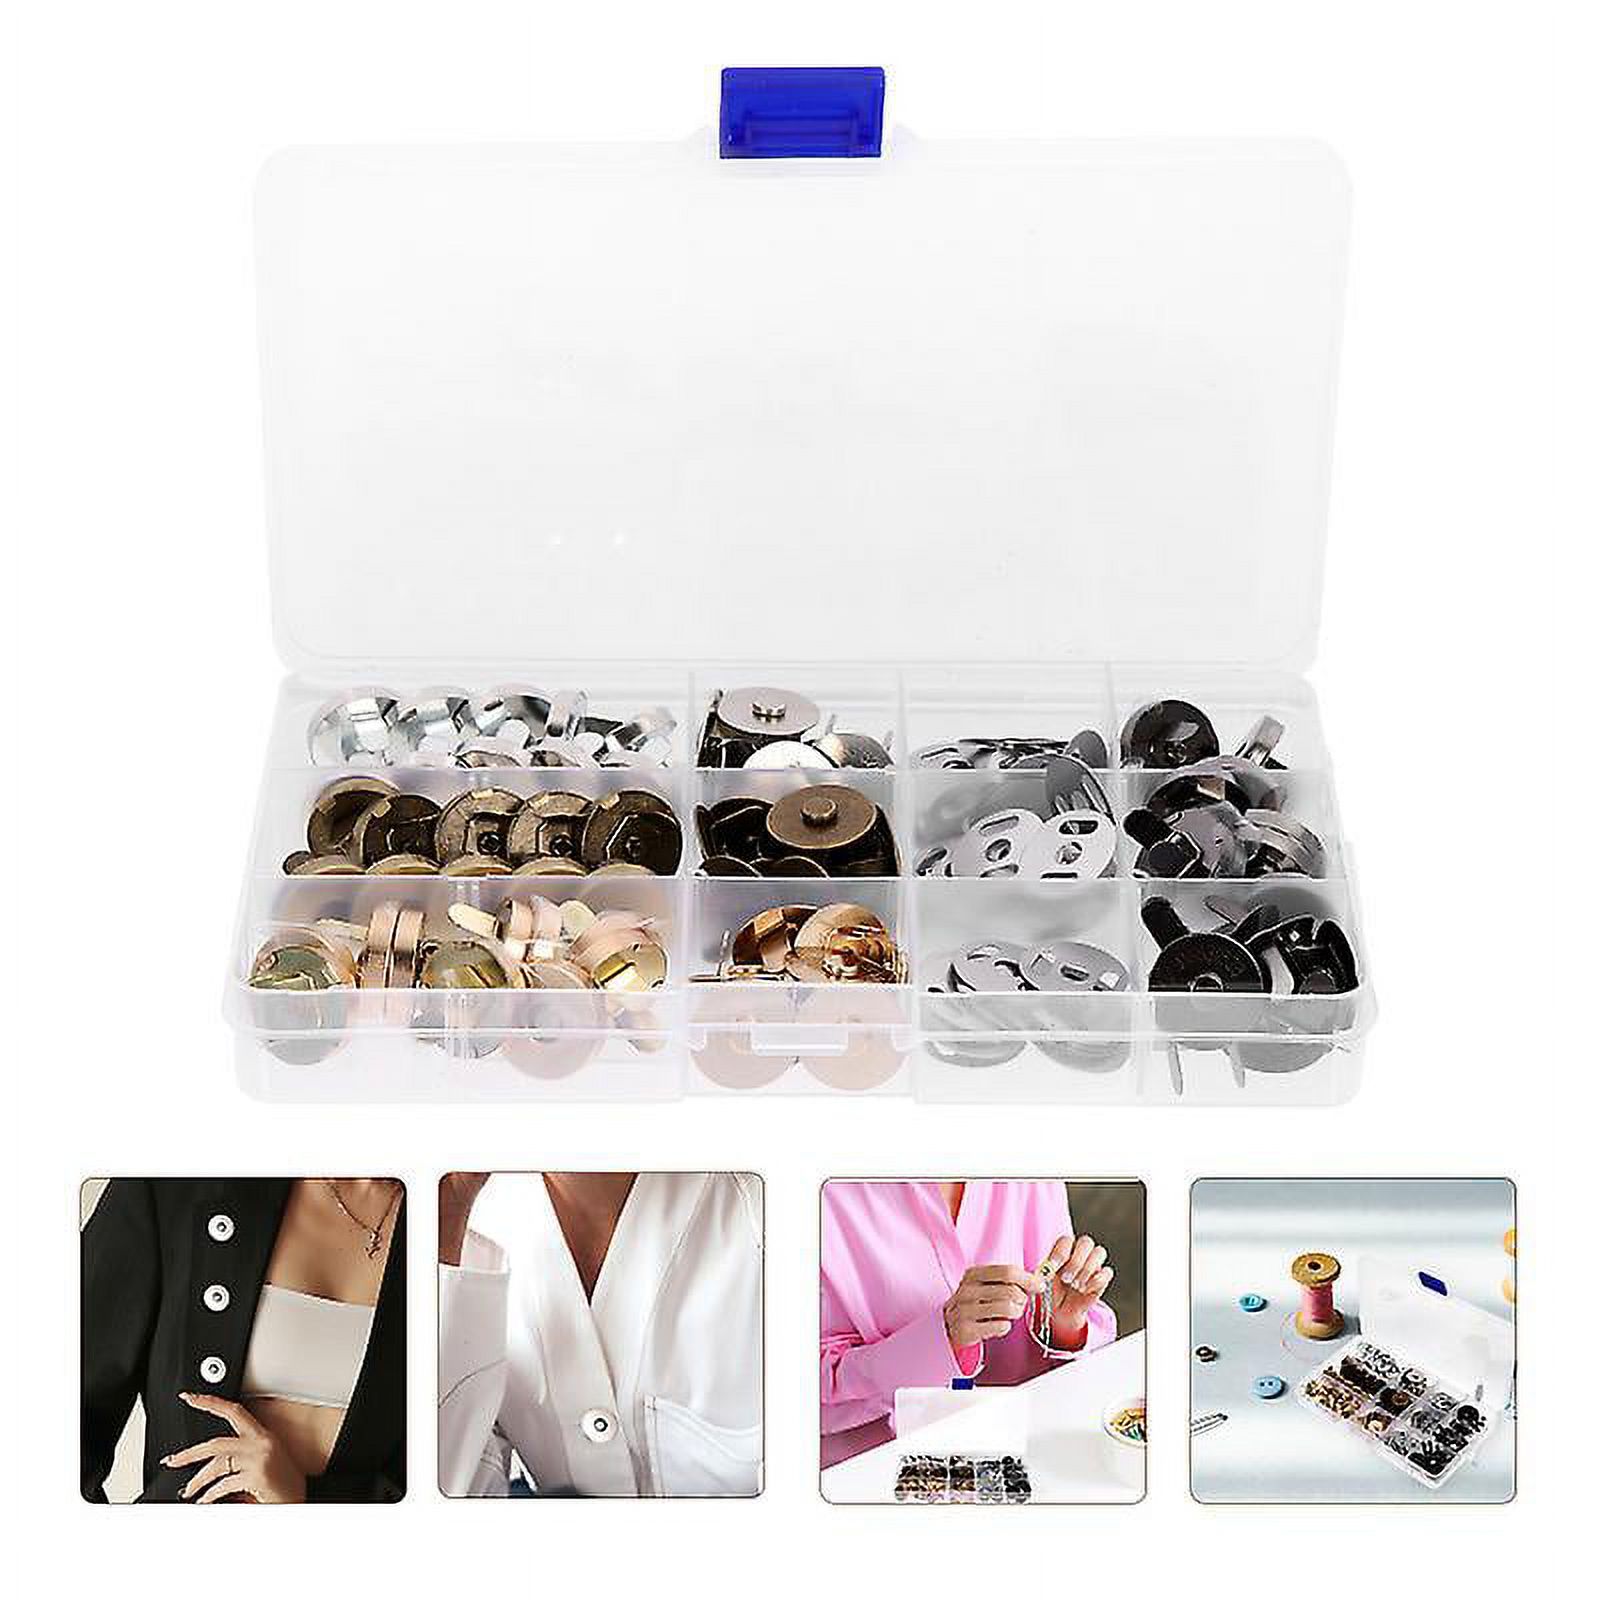 40pcs Magnetic Buttons for Clothing